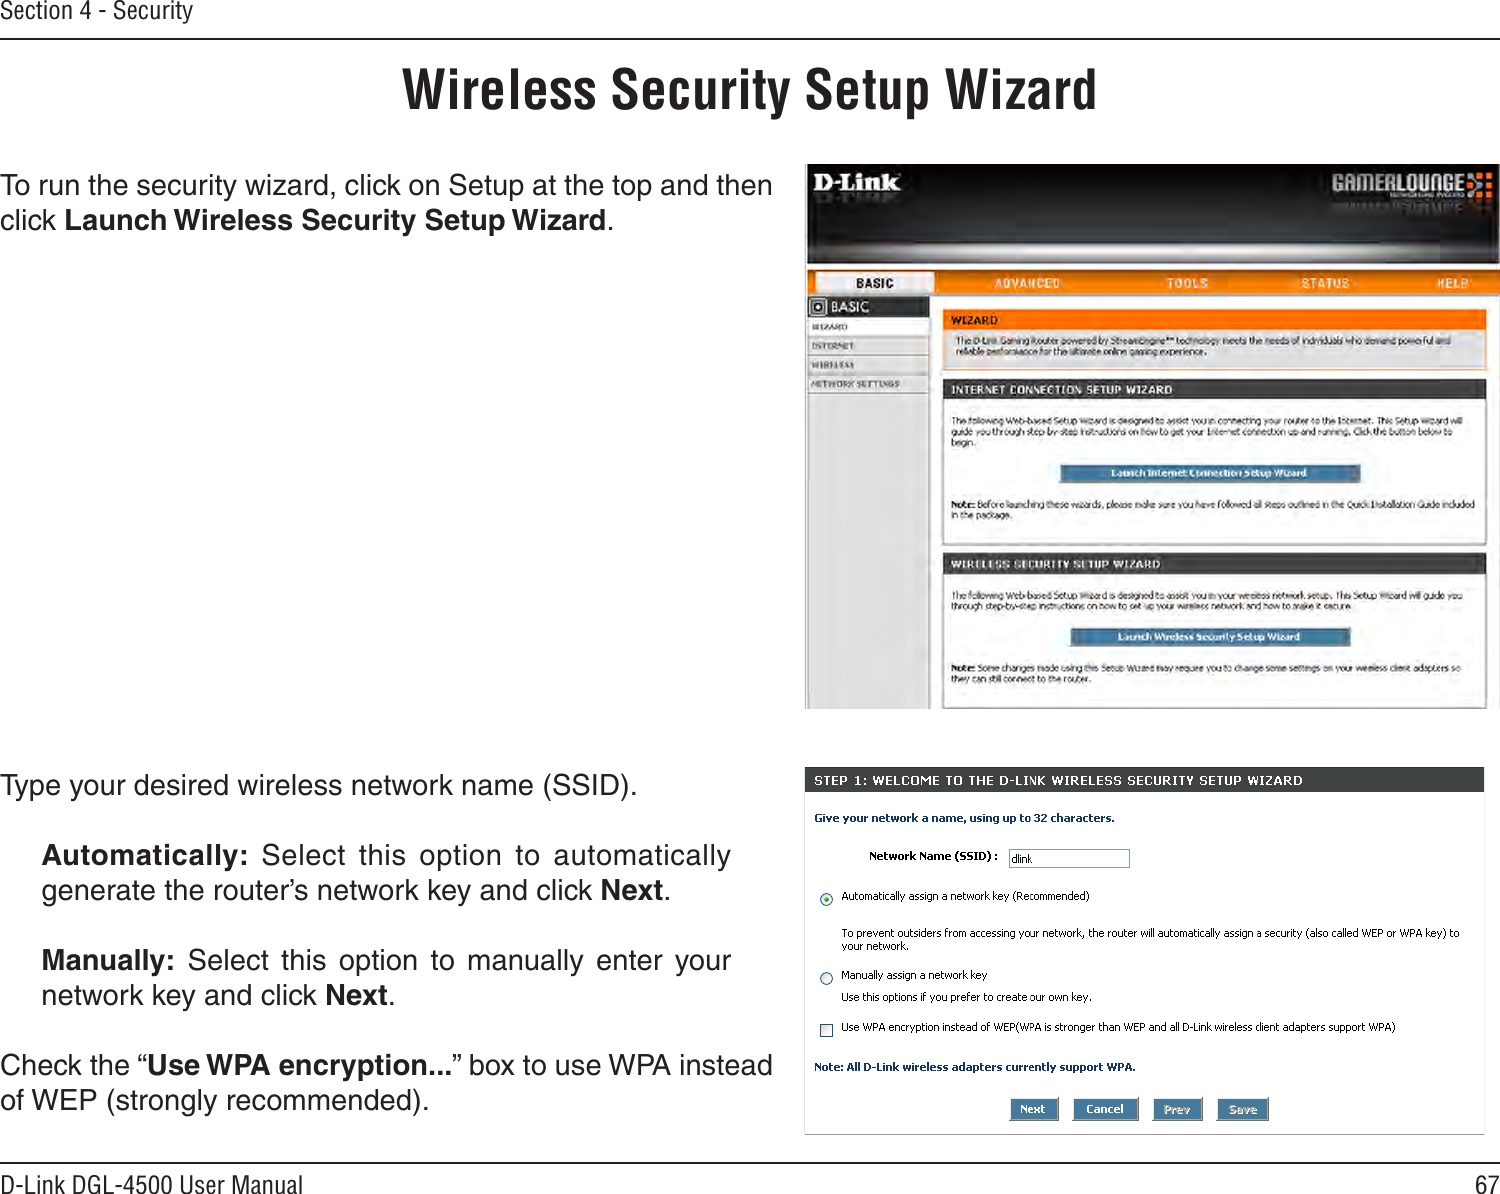 67D-Link DGL-4500 User ManualSection 4 - SecurityWireless Security Setup WizardTo run the security wizard, click on Setup at the top and then click Launch Wireless Security Setup Wizard.Type your desired wireless network name (SSID). Automatically:  Select  this  option  to  automatically generate the router’s network key and click Next.Manually:  Select  this  option  to  manually  enter  your network key and click Next.Check the “Use WPA encryption...” box to use WPA instead of WEP (strongly recommended).